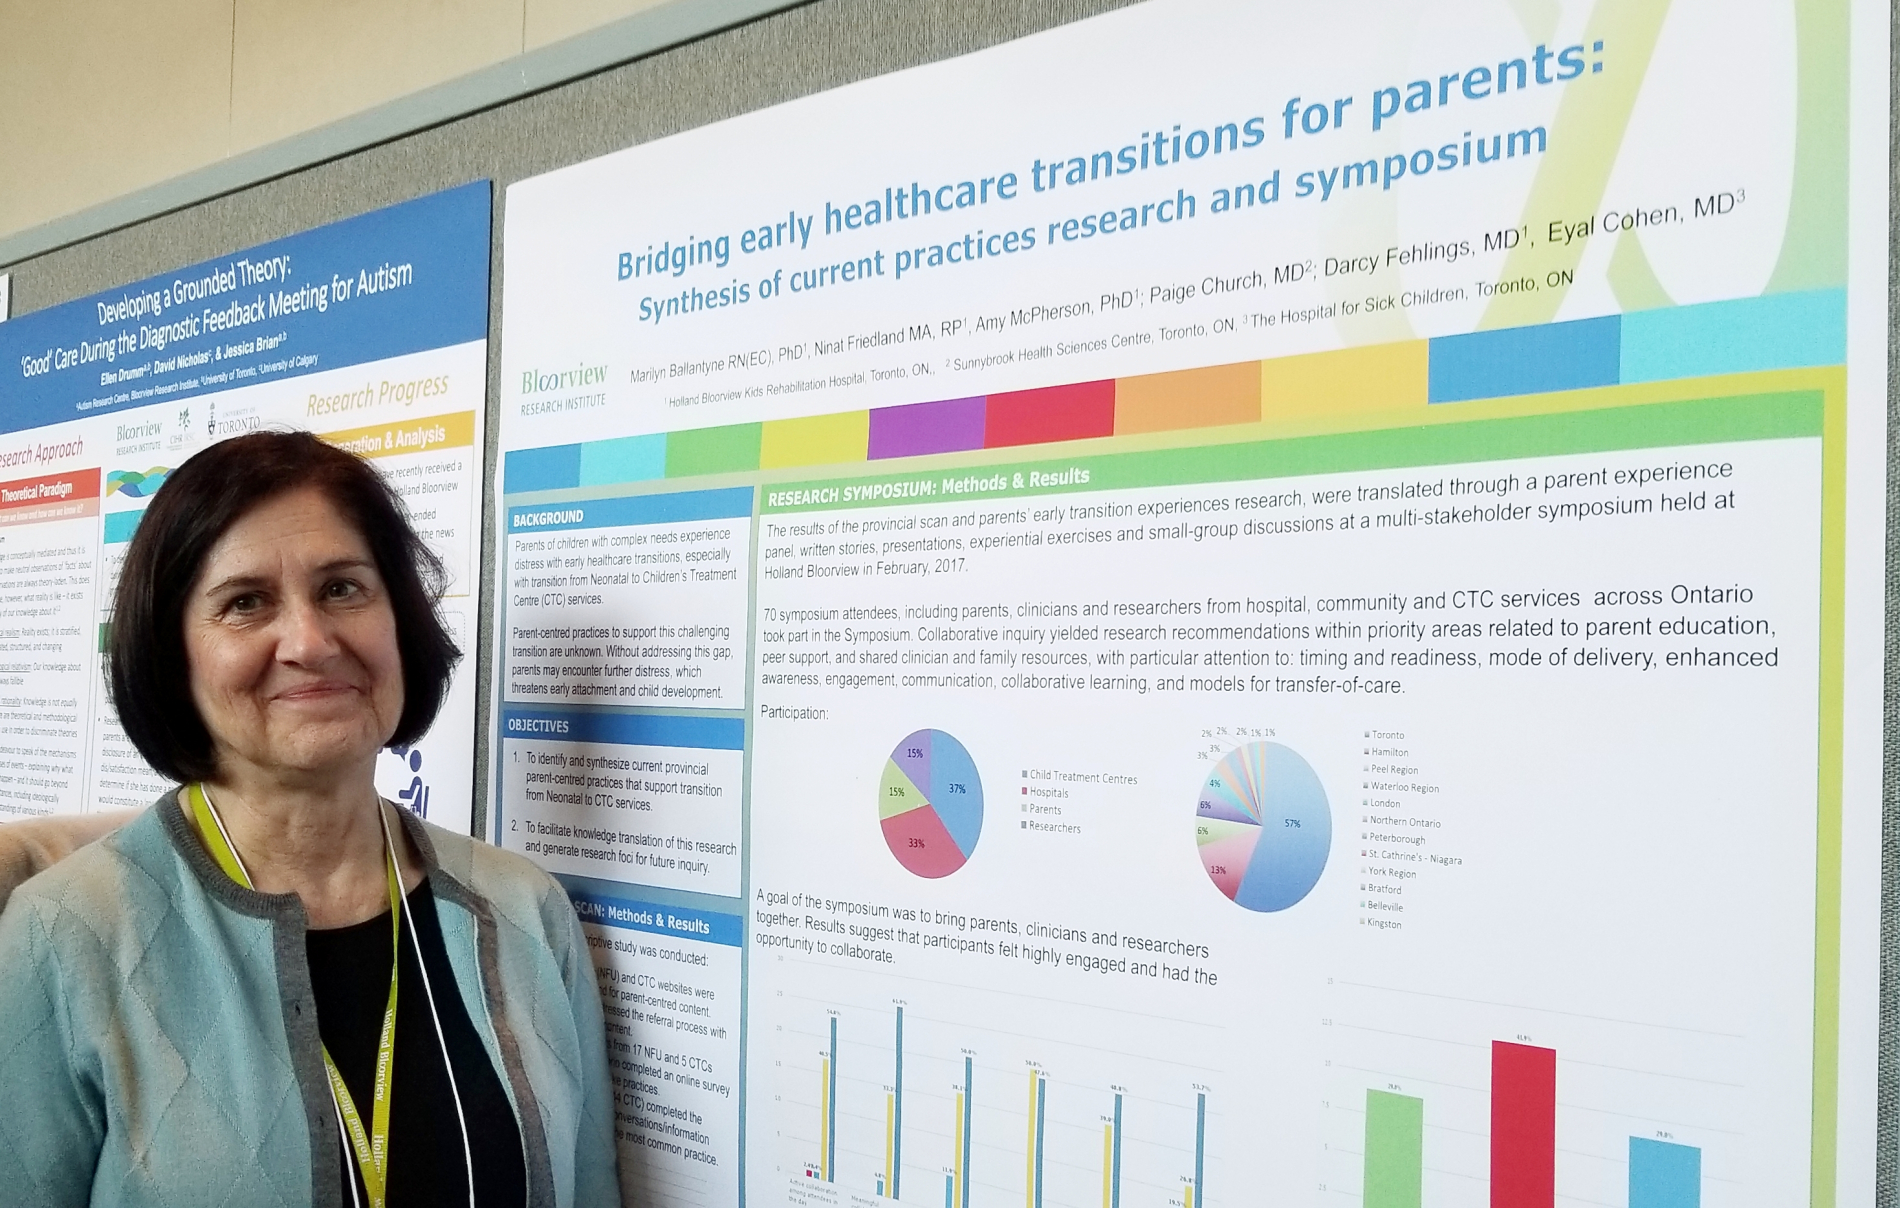 Marilyn Ballantyne stands in front of a presentation poster titled "Bridging early healthcare transitions for parents"